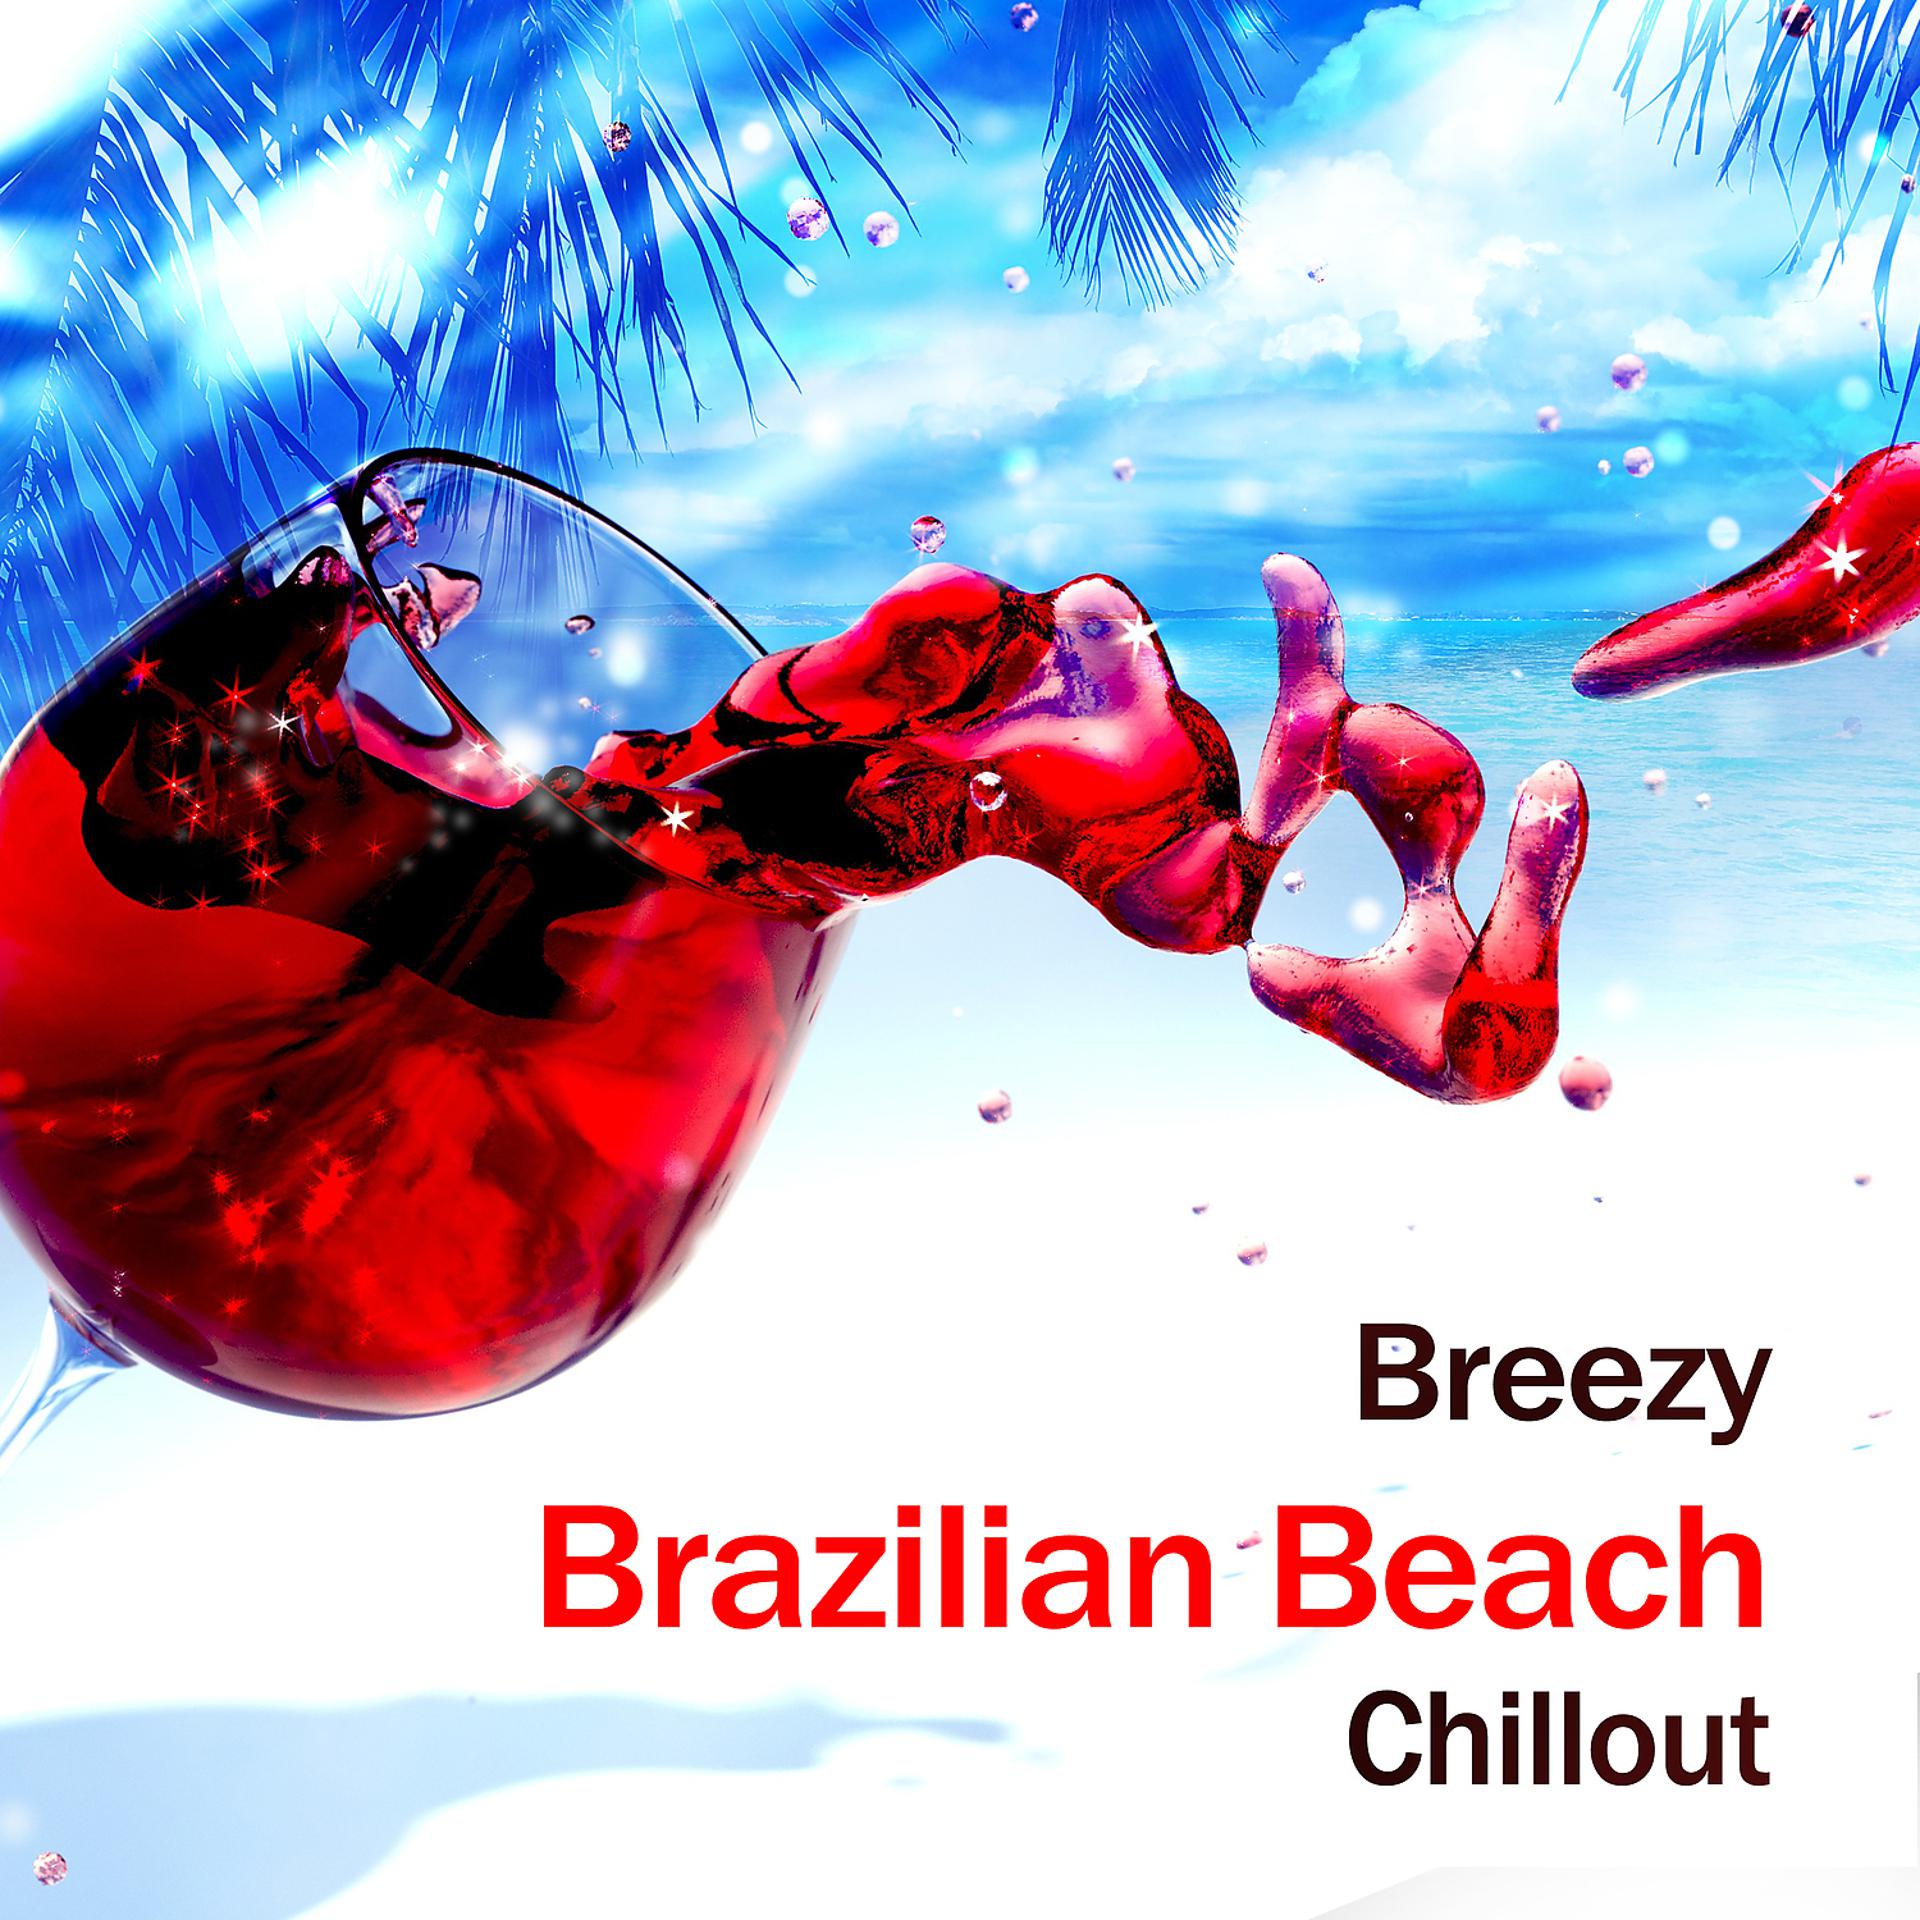 Постер альбома Breezy Brazilian Beach Chillout: Get the Party Started with Electronic Music Groove, Unforgettable Moments & New Love, Energy & New Mood Experience, Cool Holiday Collection